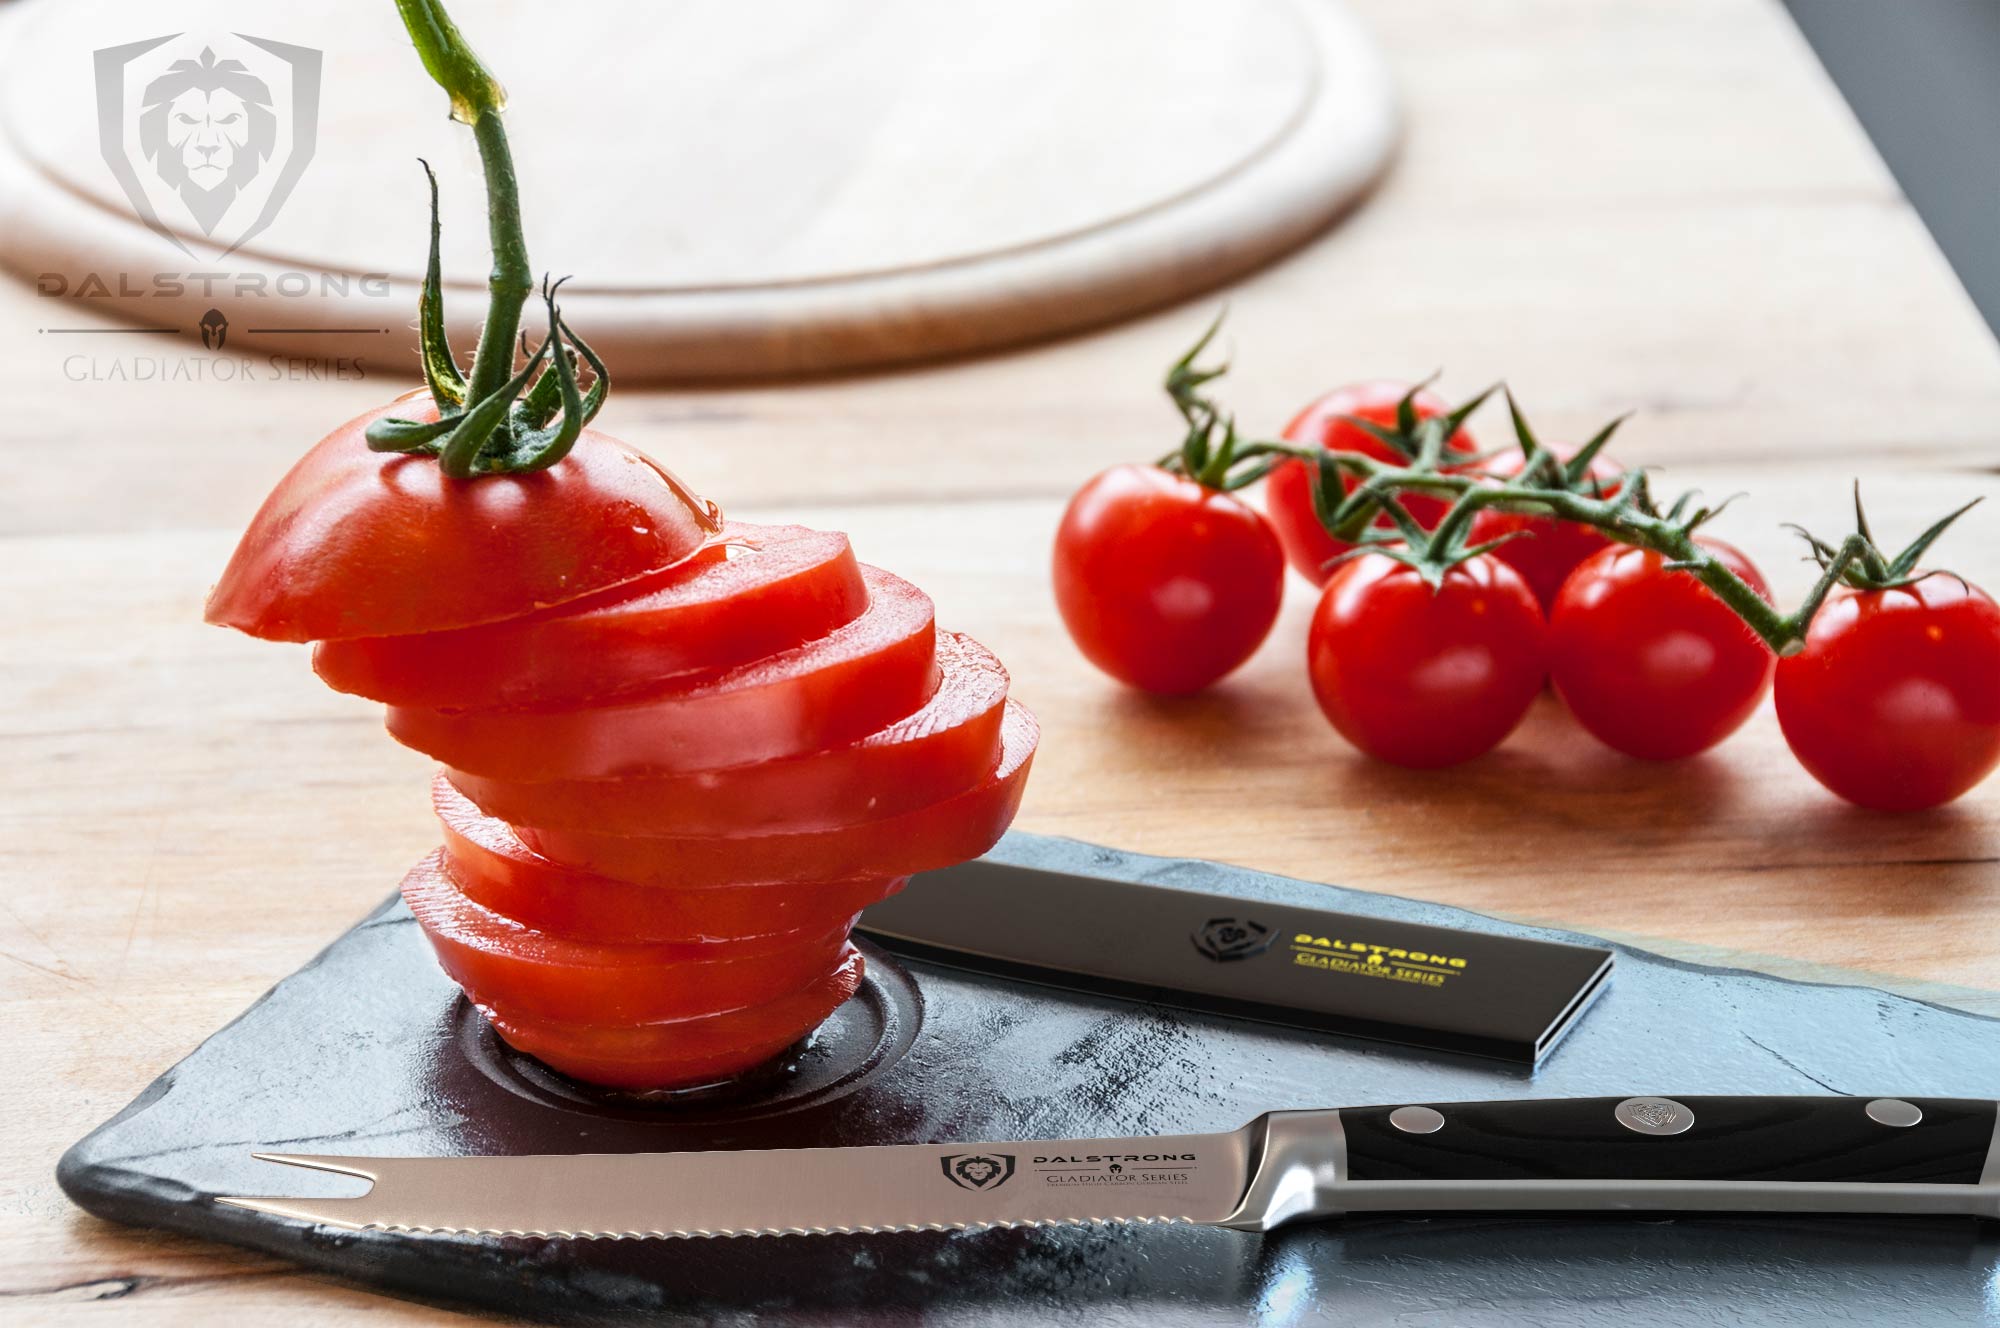 Kitchen Knife Safety & Expert Tips for Cutting Produce